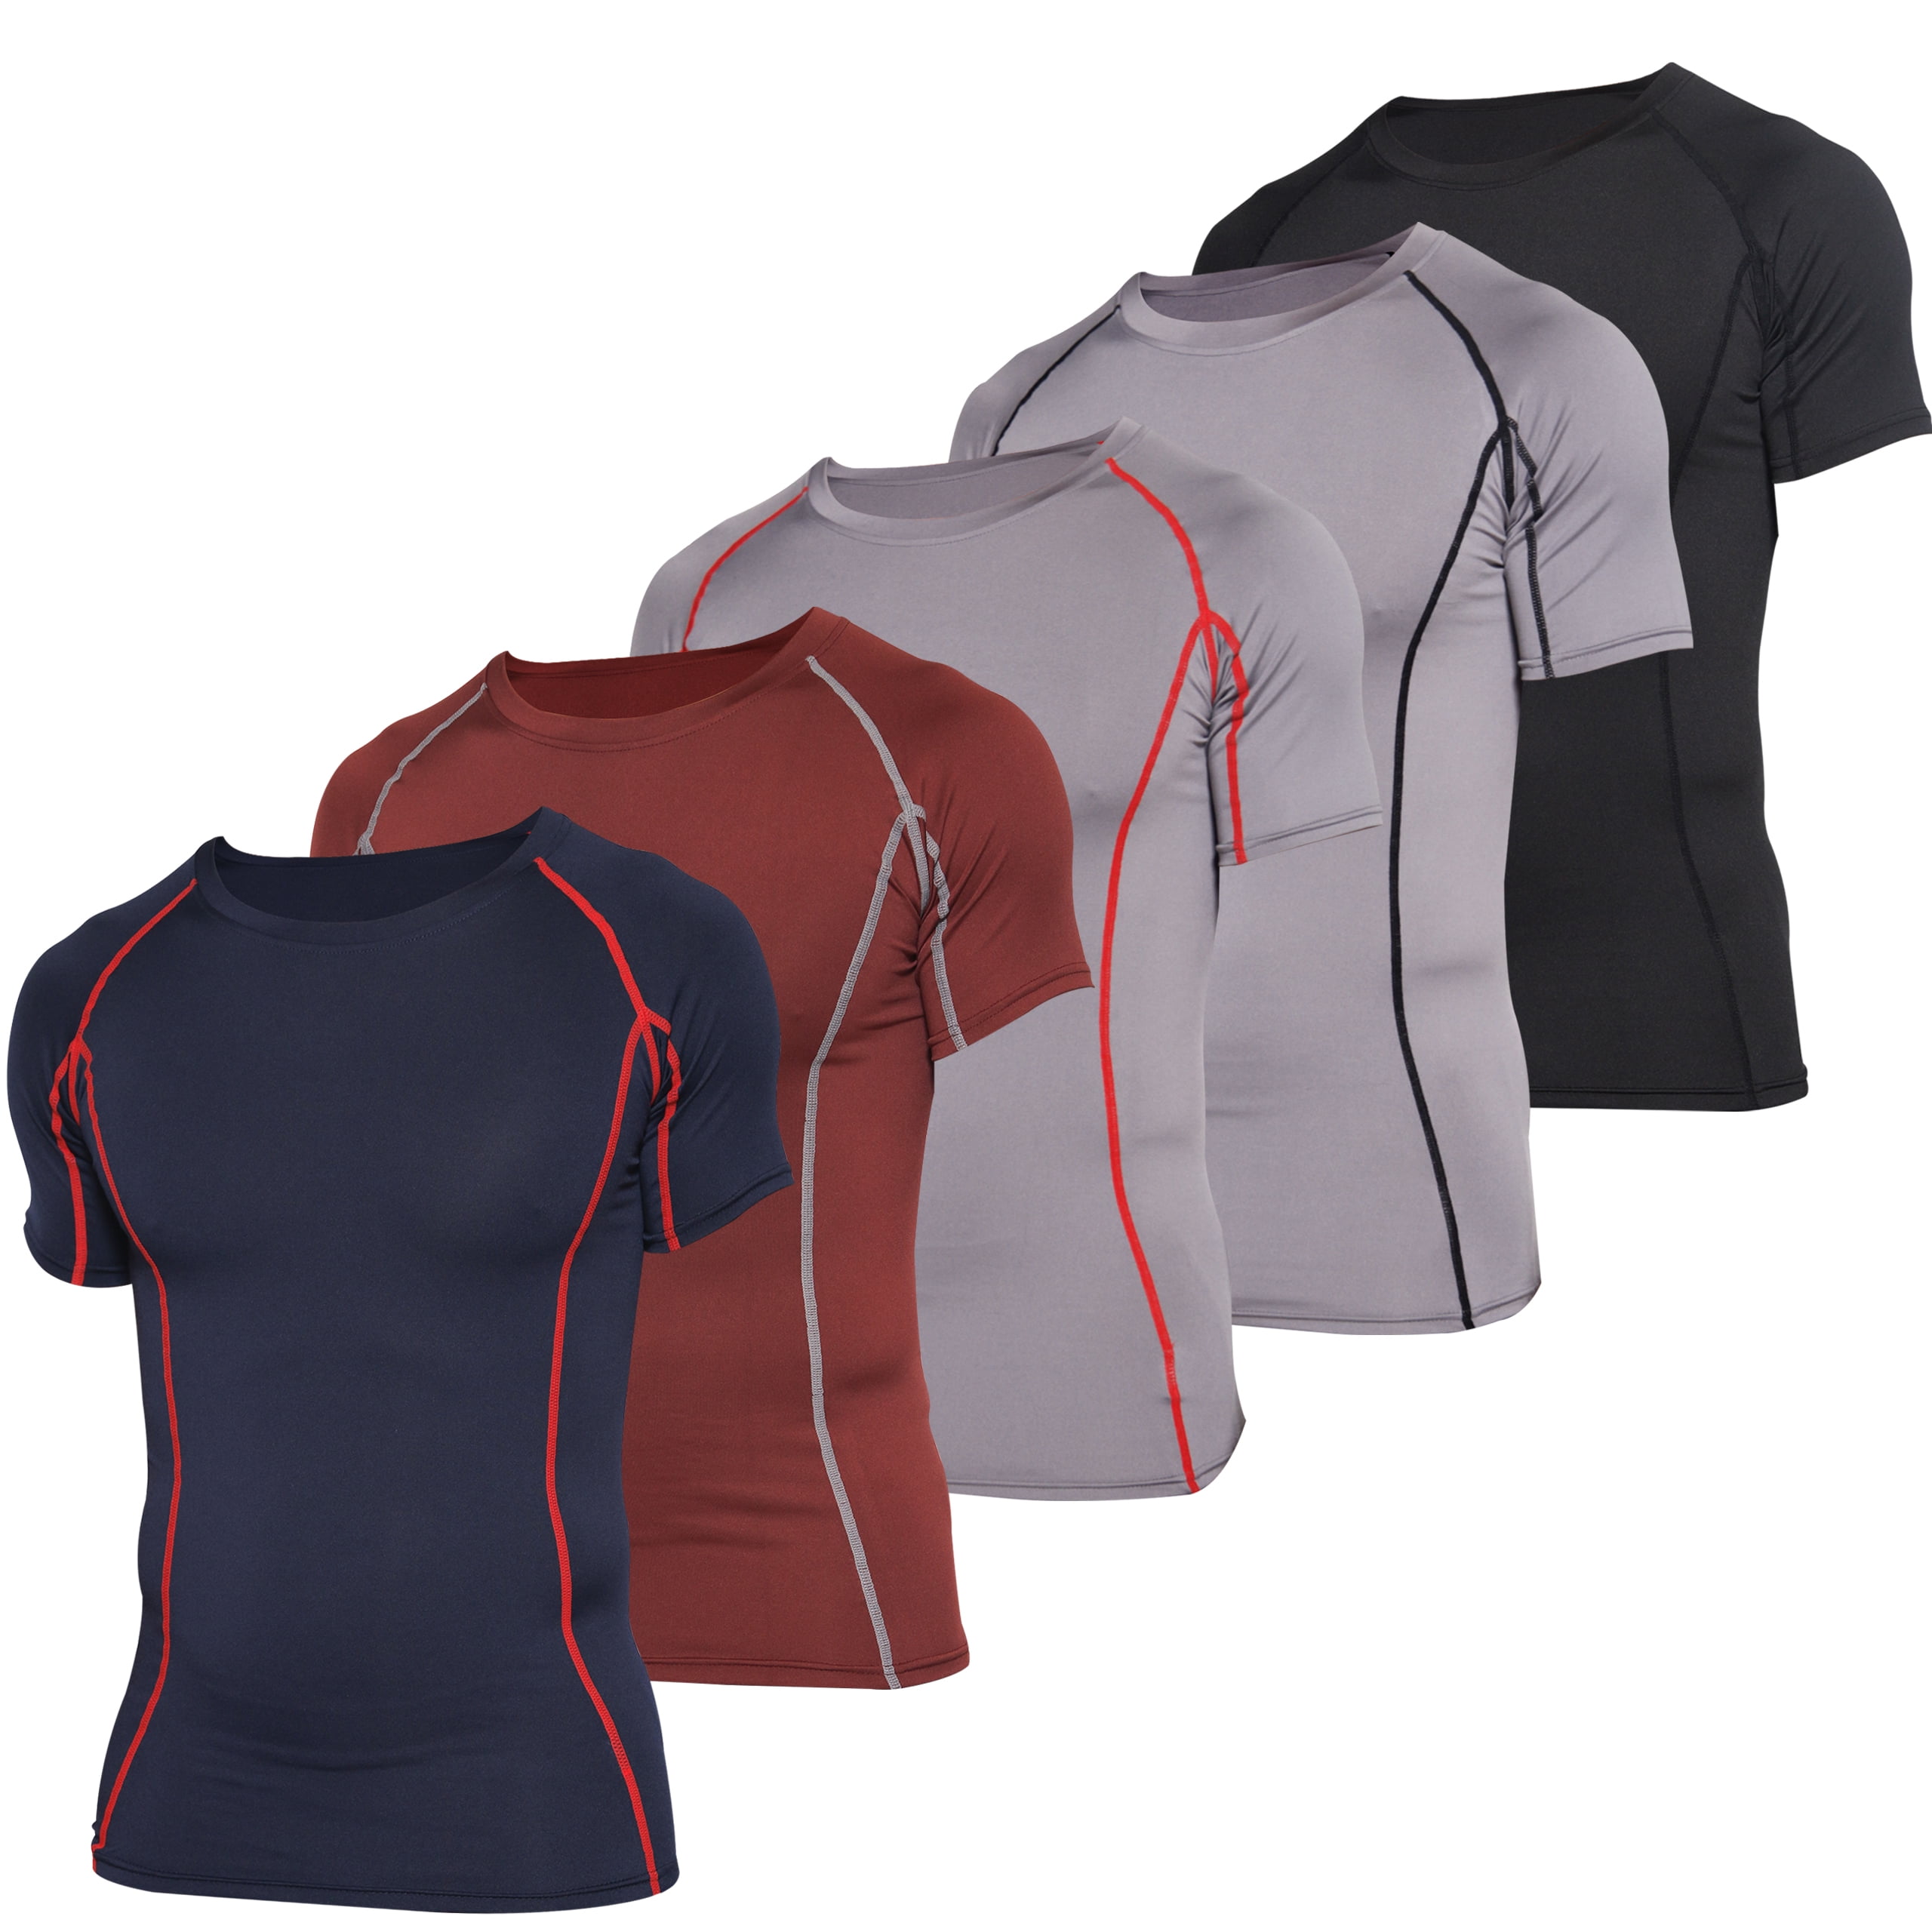 Details about   Mens Compression Plain Base Layer Top Long Sleeve Thermal Gym Sports Shirt Top 